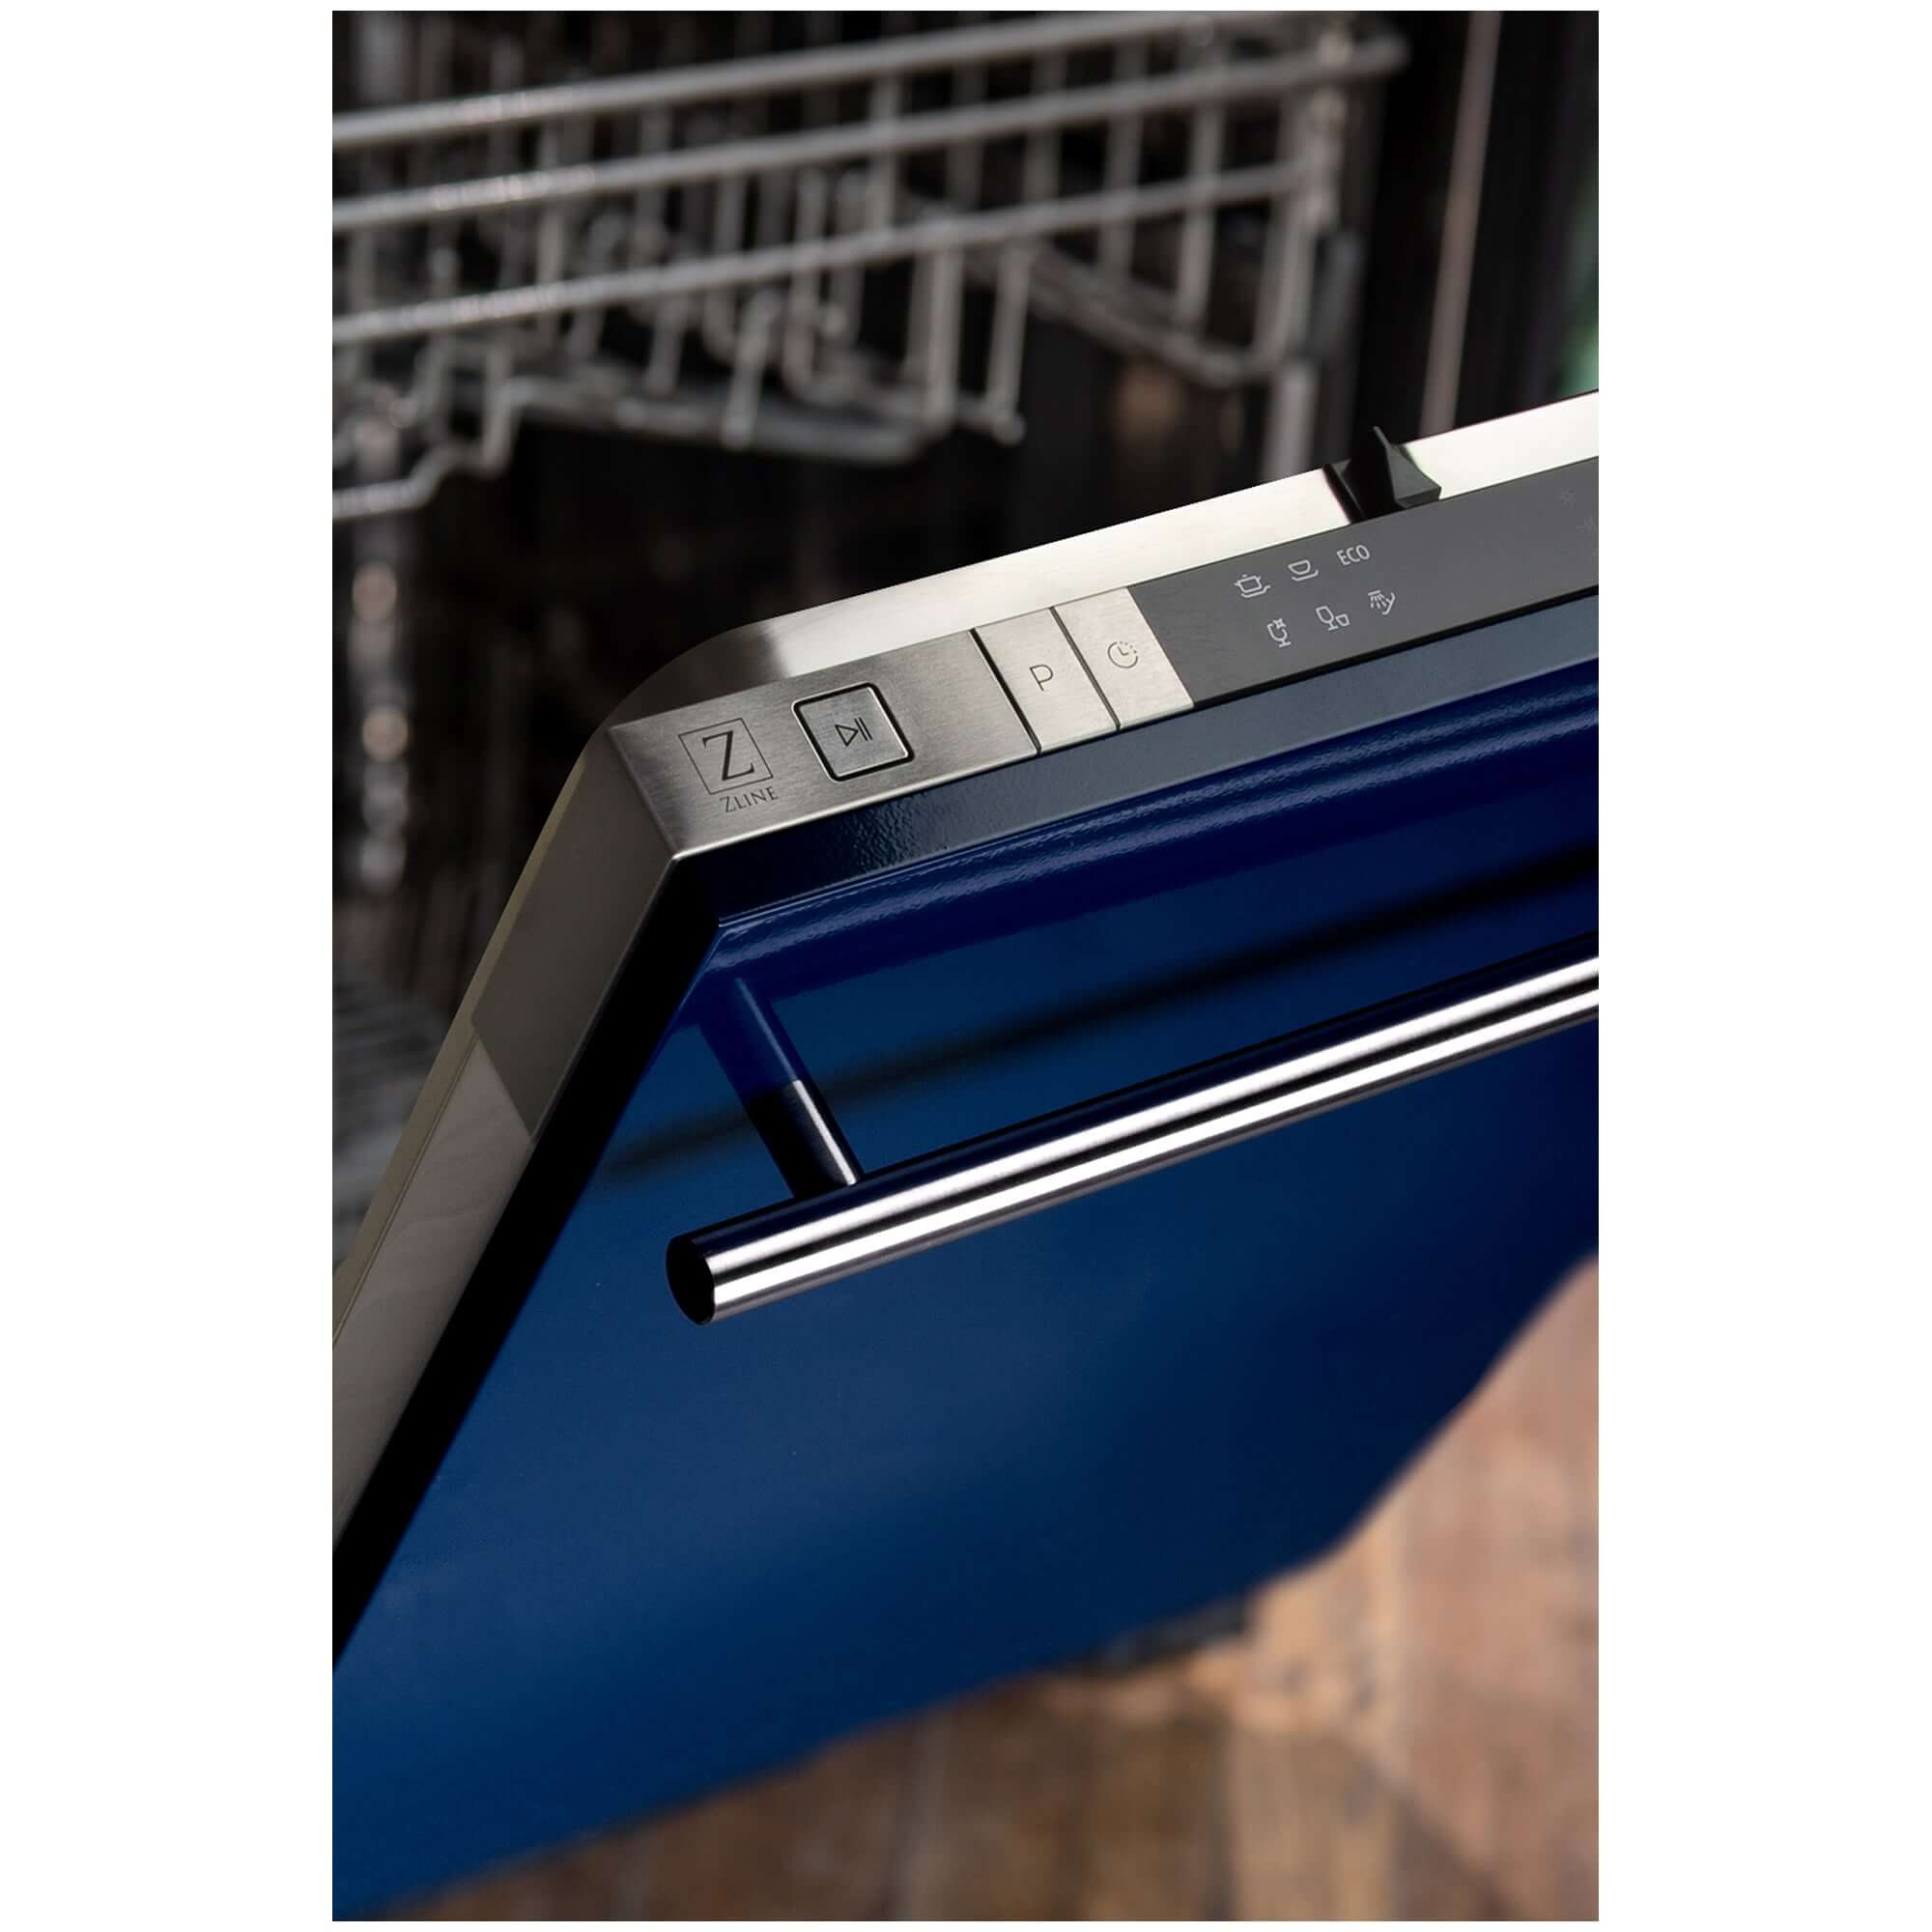 ZLINE 18 in. Compact Blue Gloss Top Control Built-In Dishwasher with Stainless Steel Tub and Modern Style Handle, 52dBa (DW-BG-H-18) built-in to cabinets in a luxury kitchen.